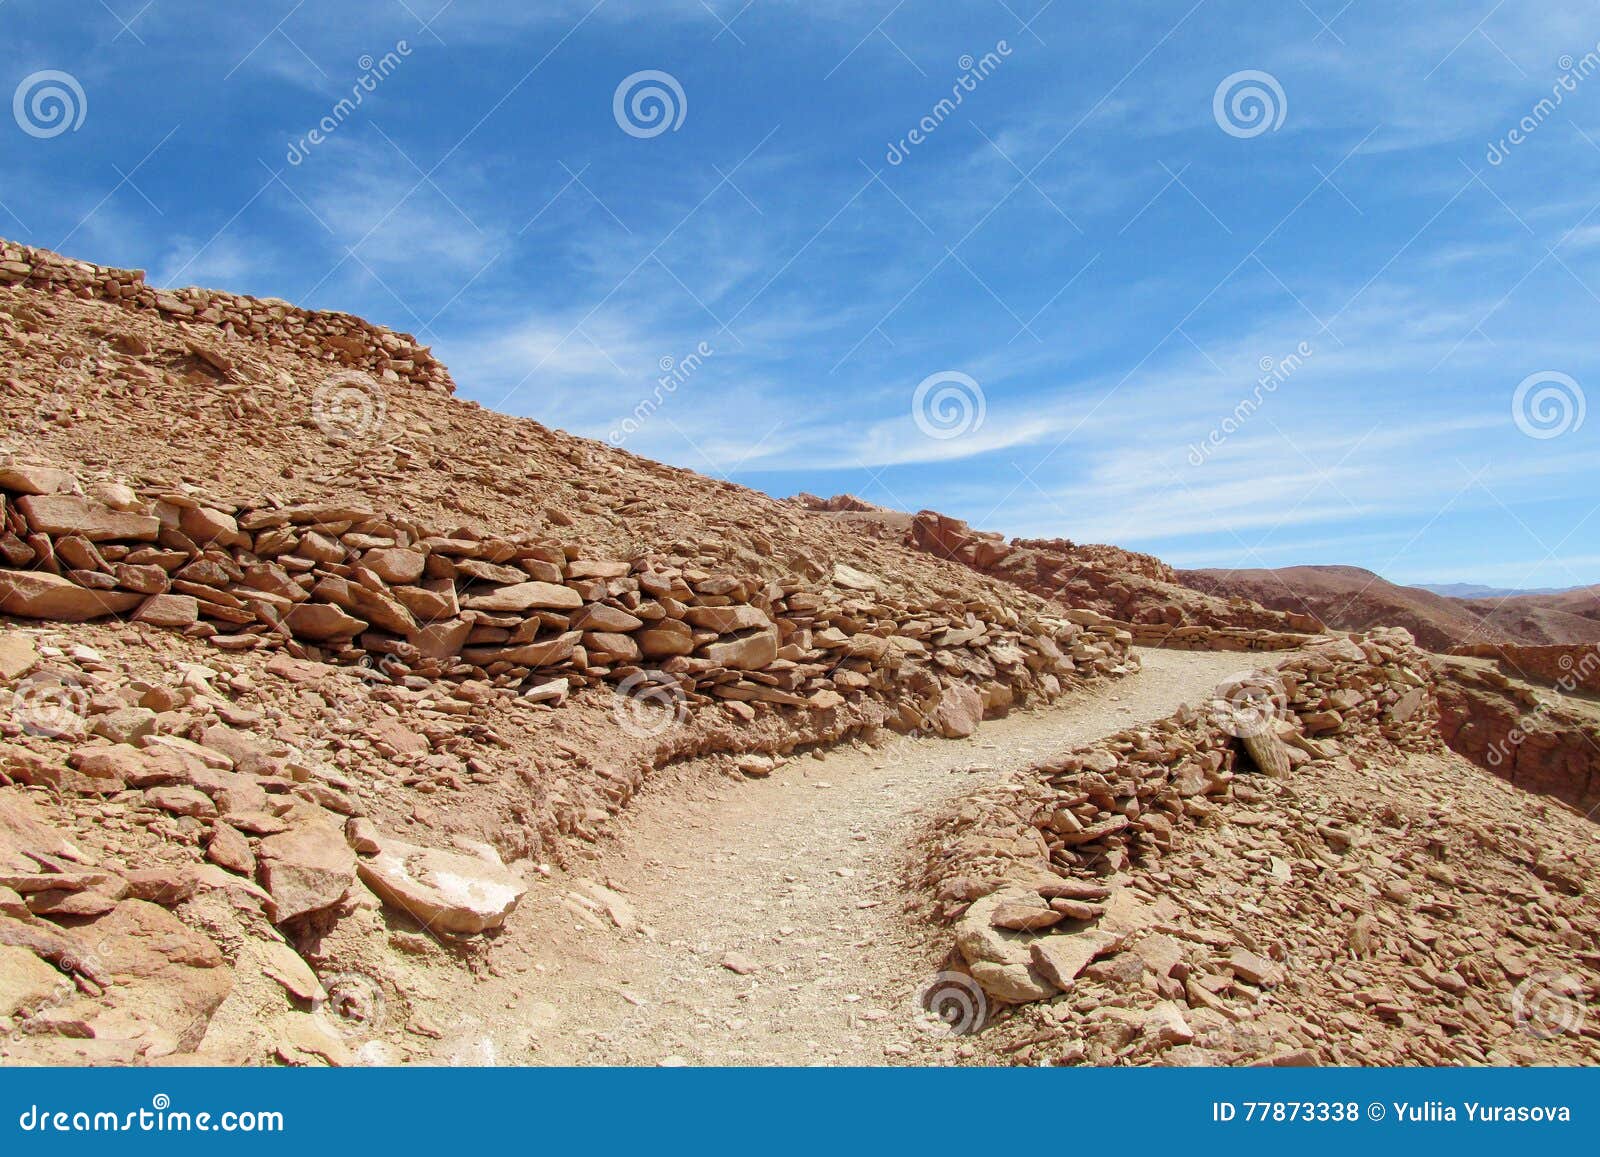 the path to the pukara de quitor ruins in chile